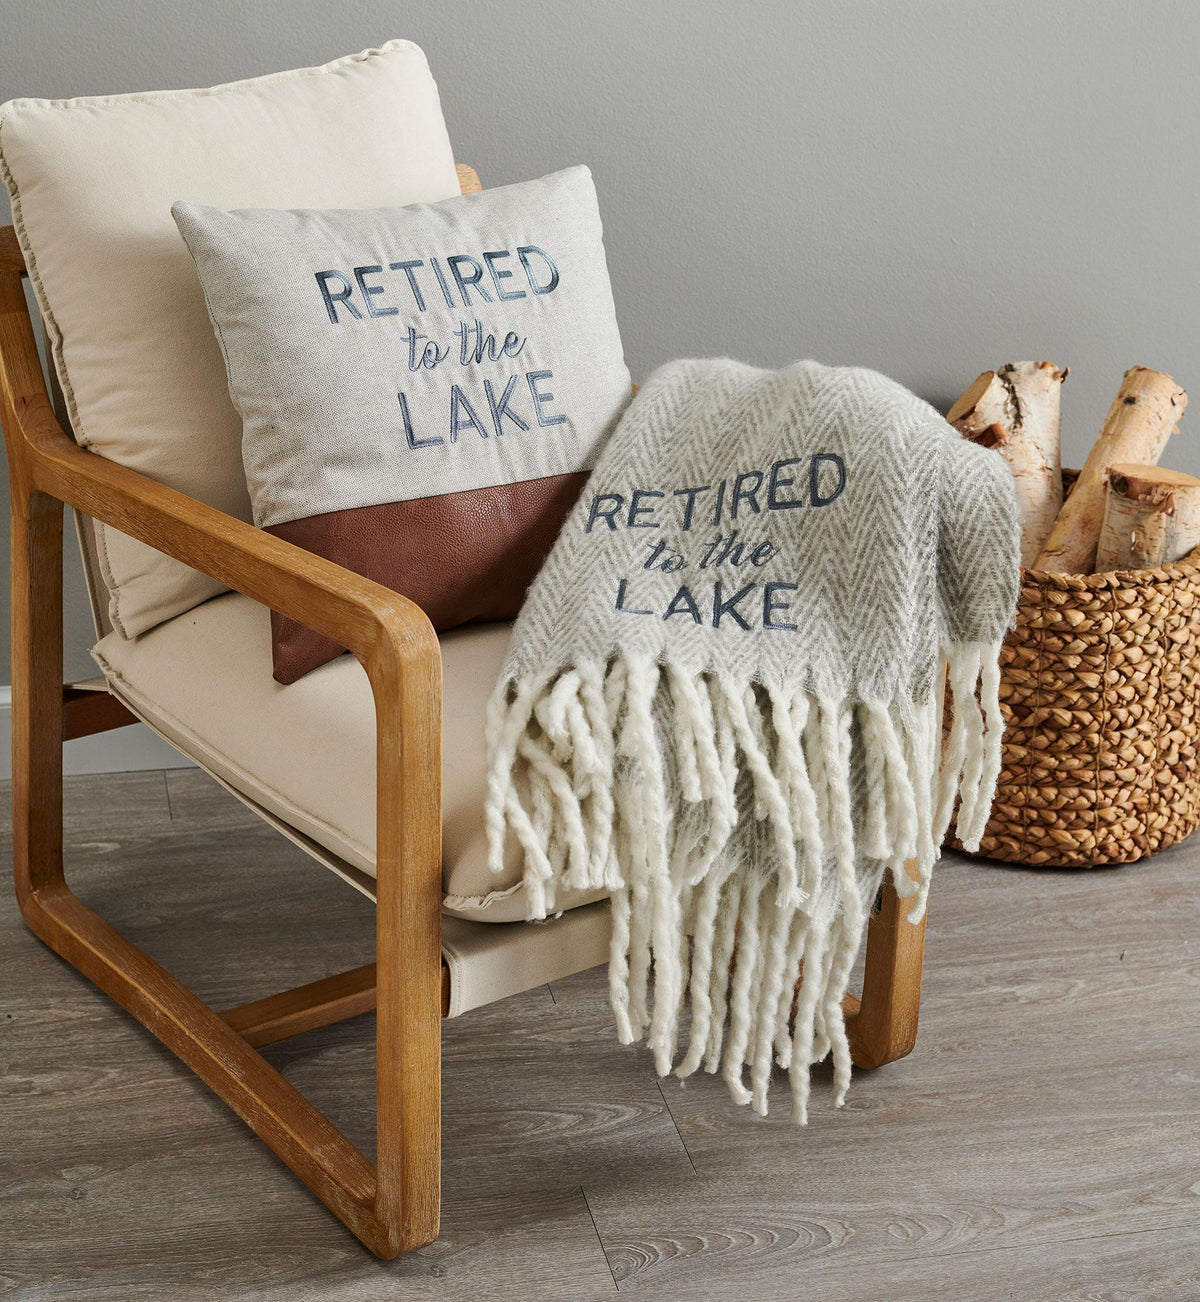 Retired to the Lake Throw and Pillow Collection - Wild Wings